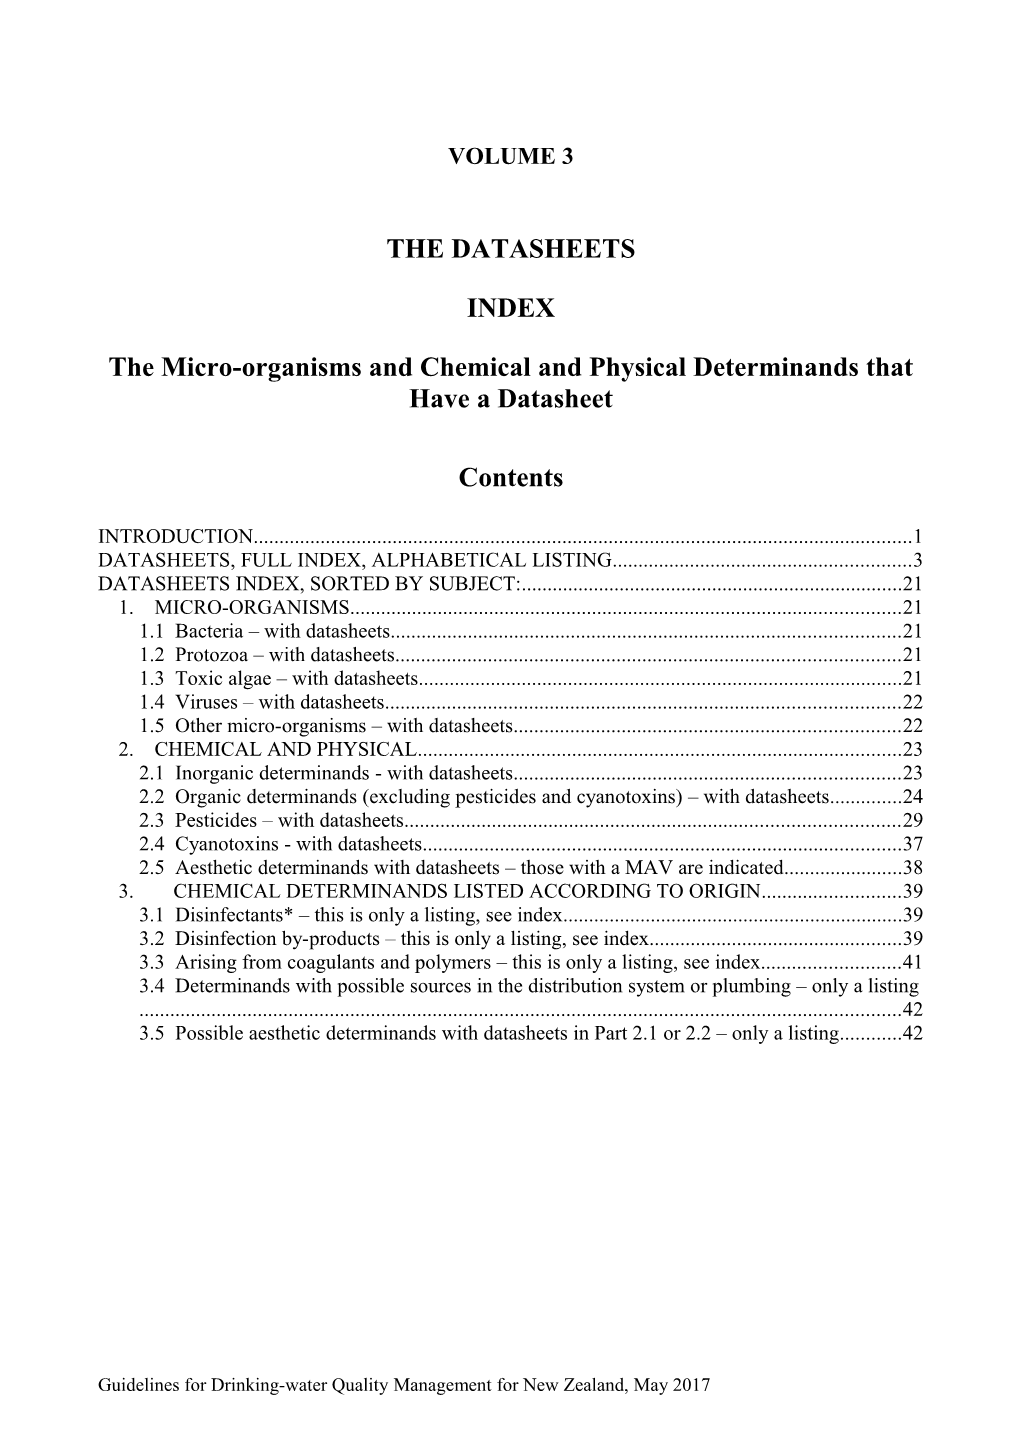 The Micro-Organisms and Chemical and Physical Determinands That Have a Datasheet